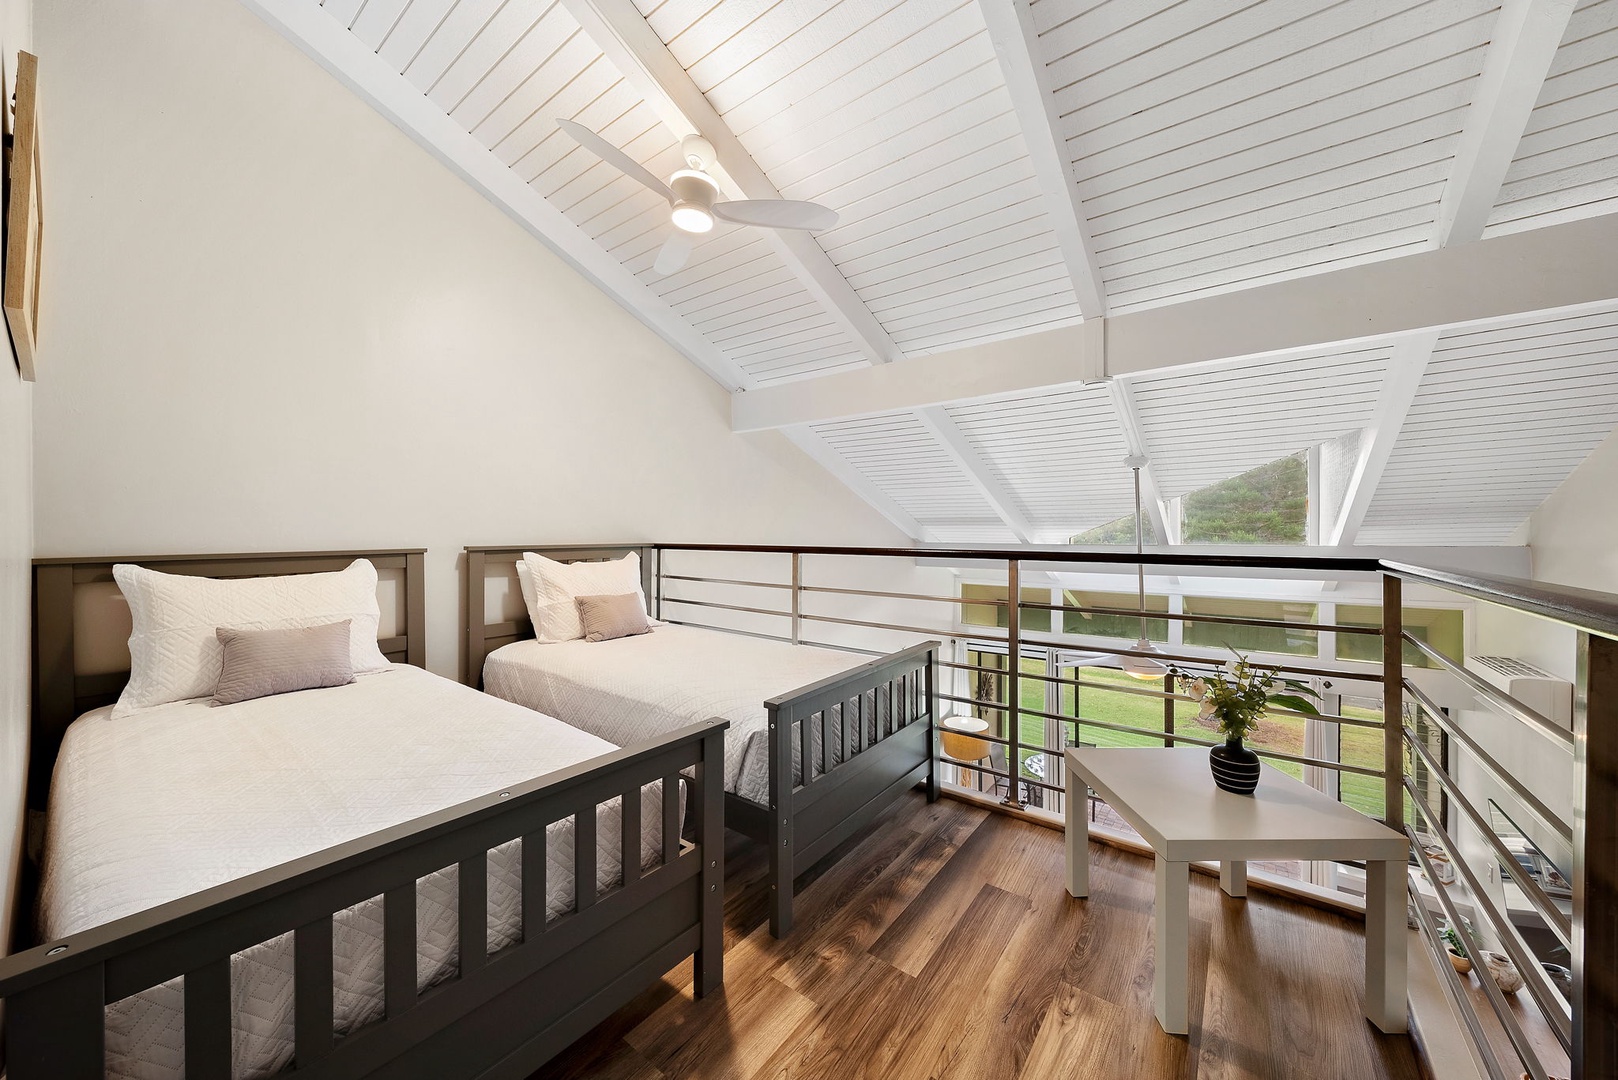 Kahuku Vacation Rentals, Kuilima Estates West #120 - Two twin sized beds in the loft.